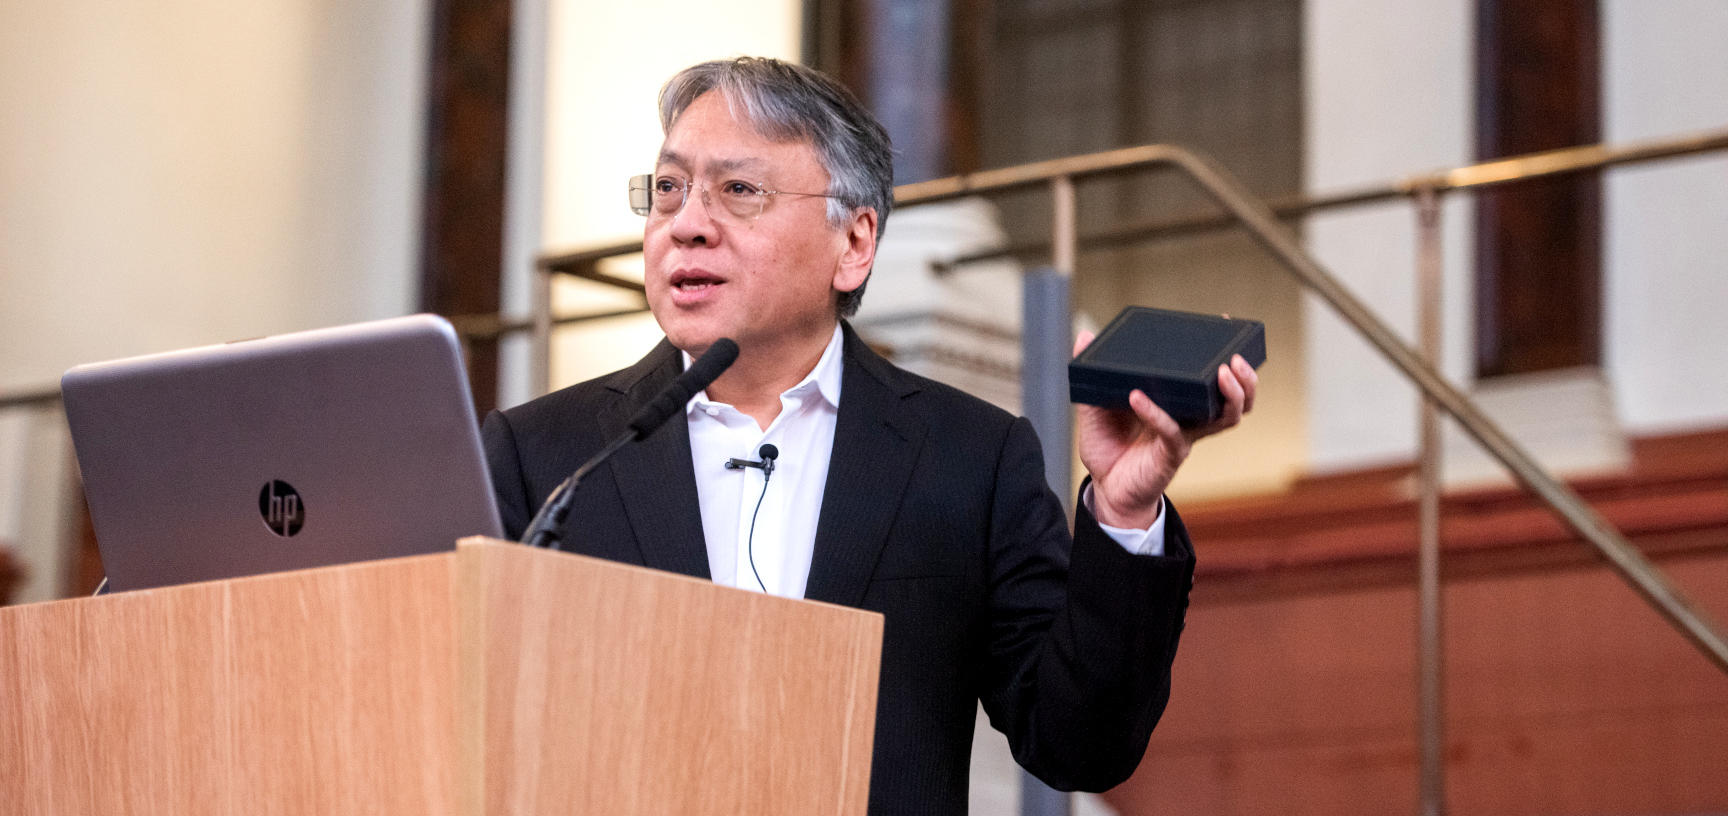 Sir Kazuo Ishiguro stands in front of a microphone and laptop, holding the Bodley Medal in its box